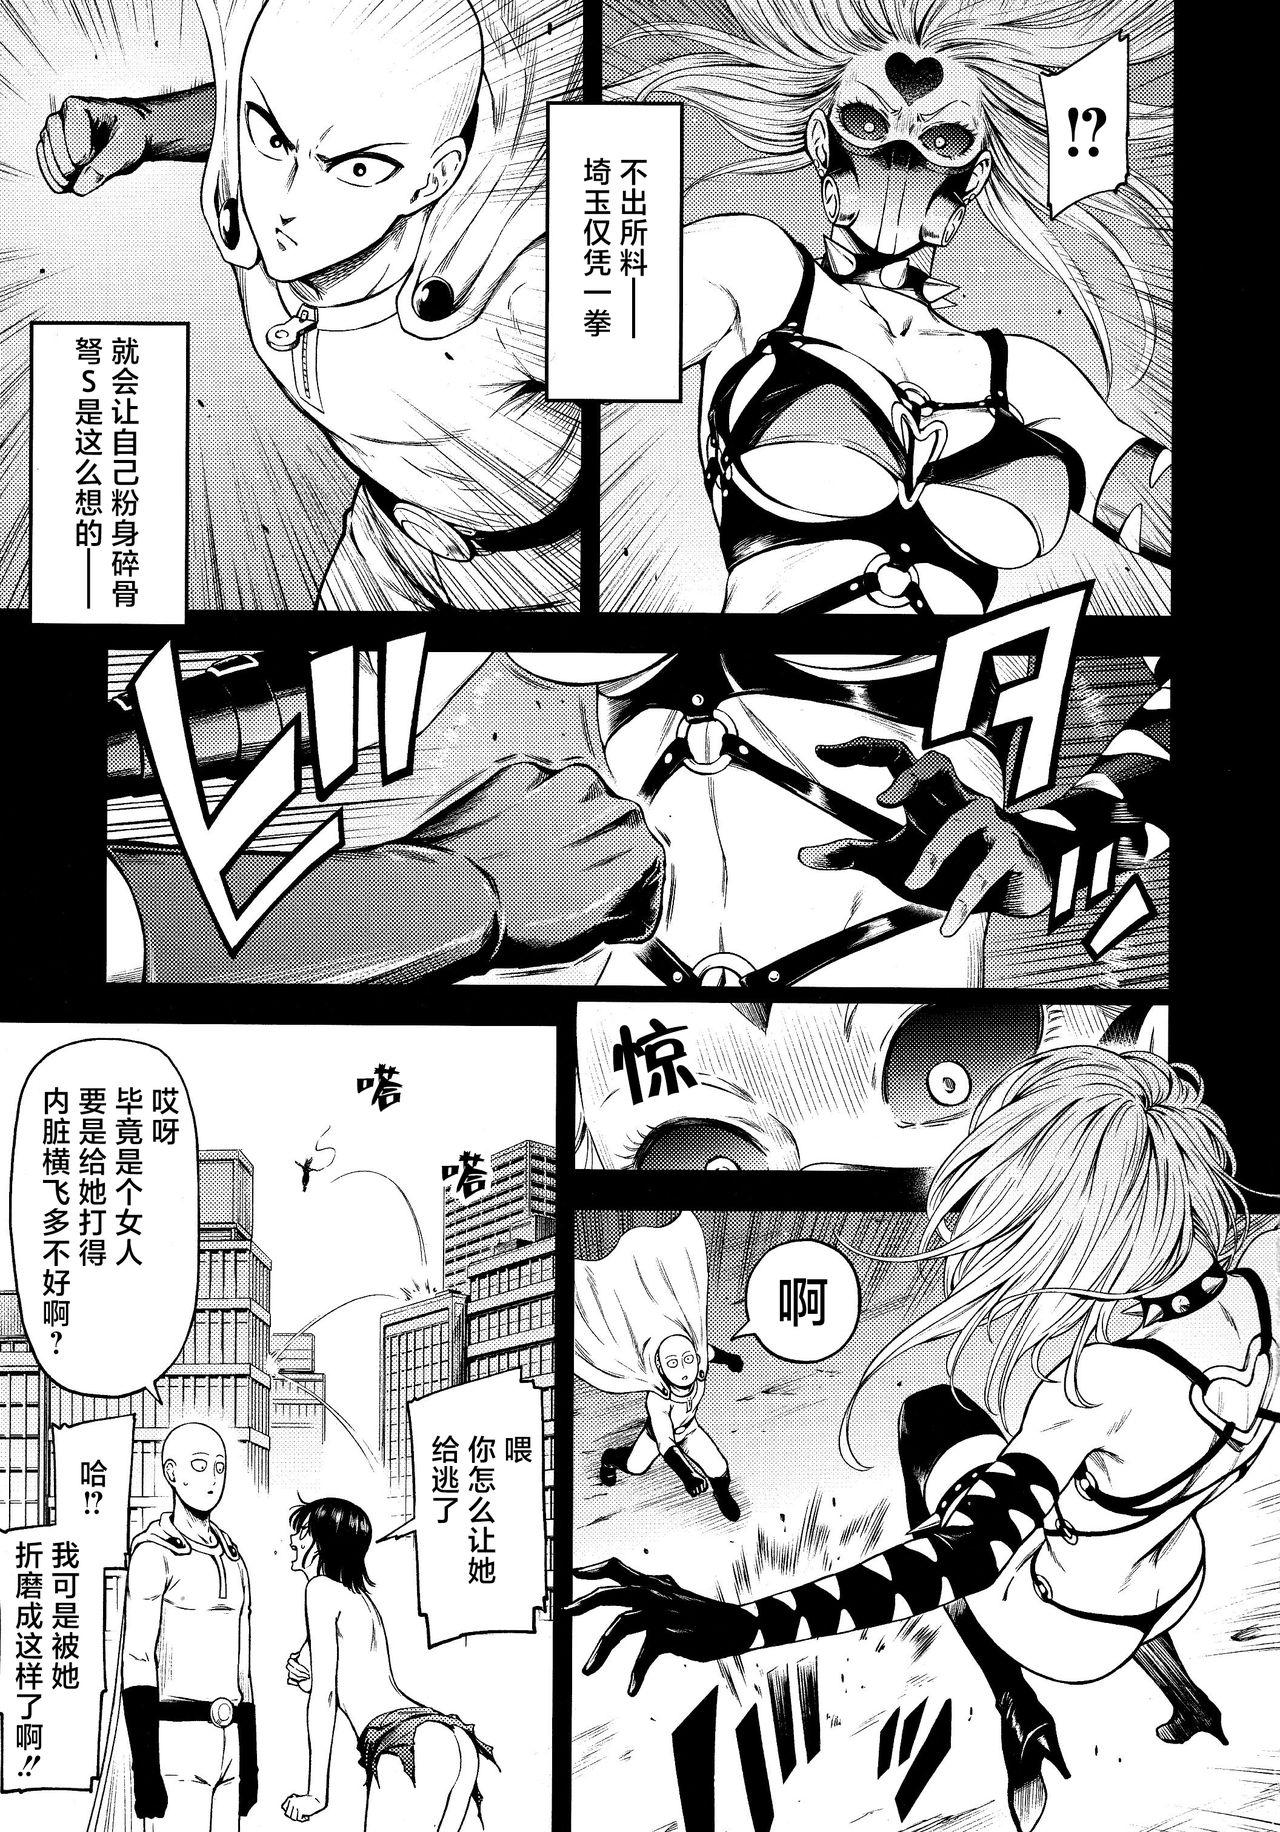 Thailand ONE-HURRICANE 8 - One punch man Teen Porn - Page 2